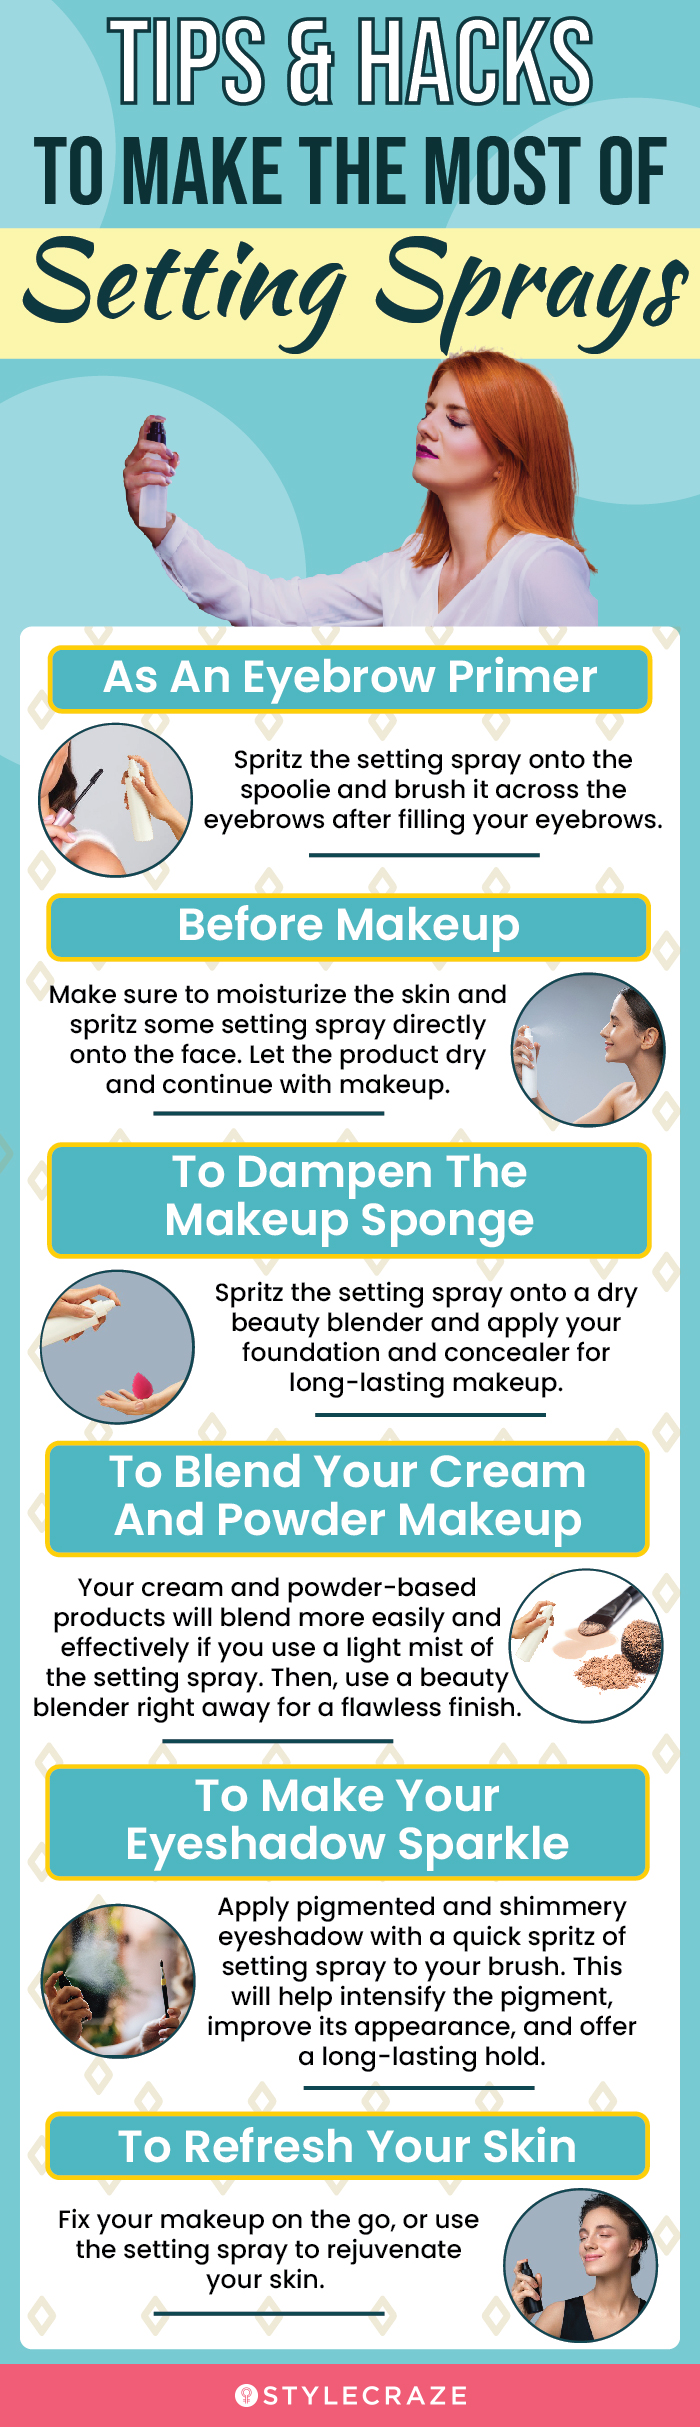 Tips & Hacks To Make The Most Of Setting Spray (infographic)